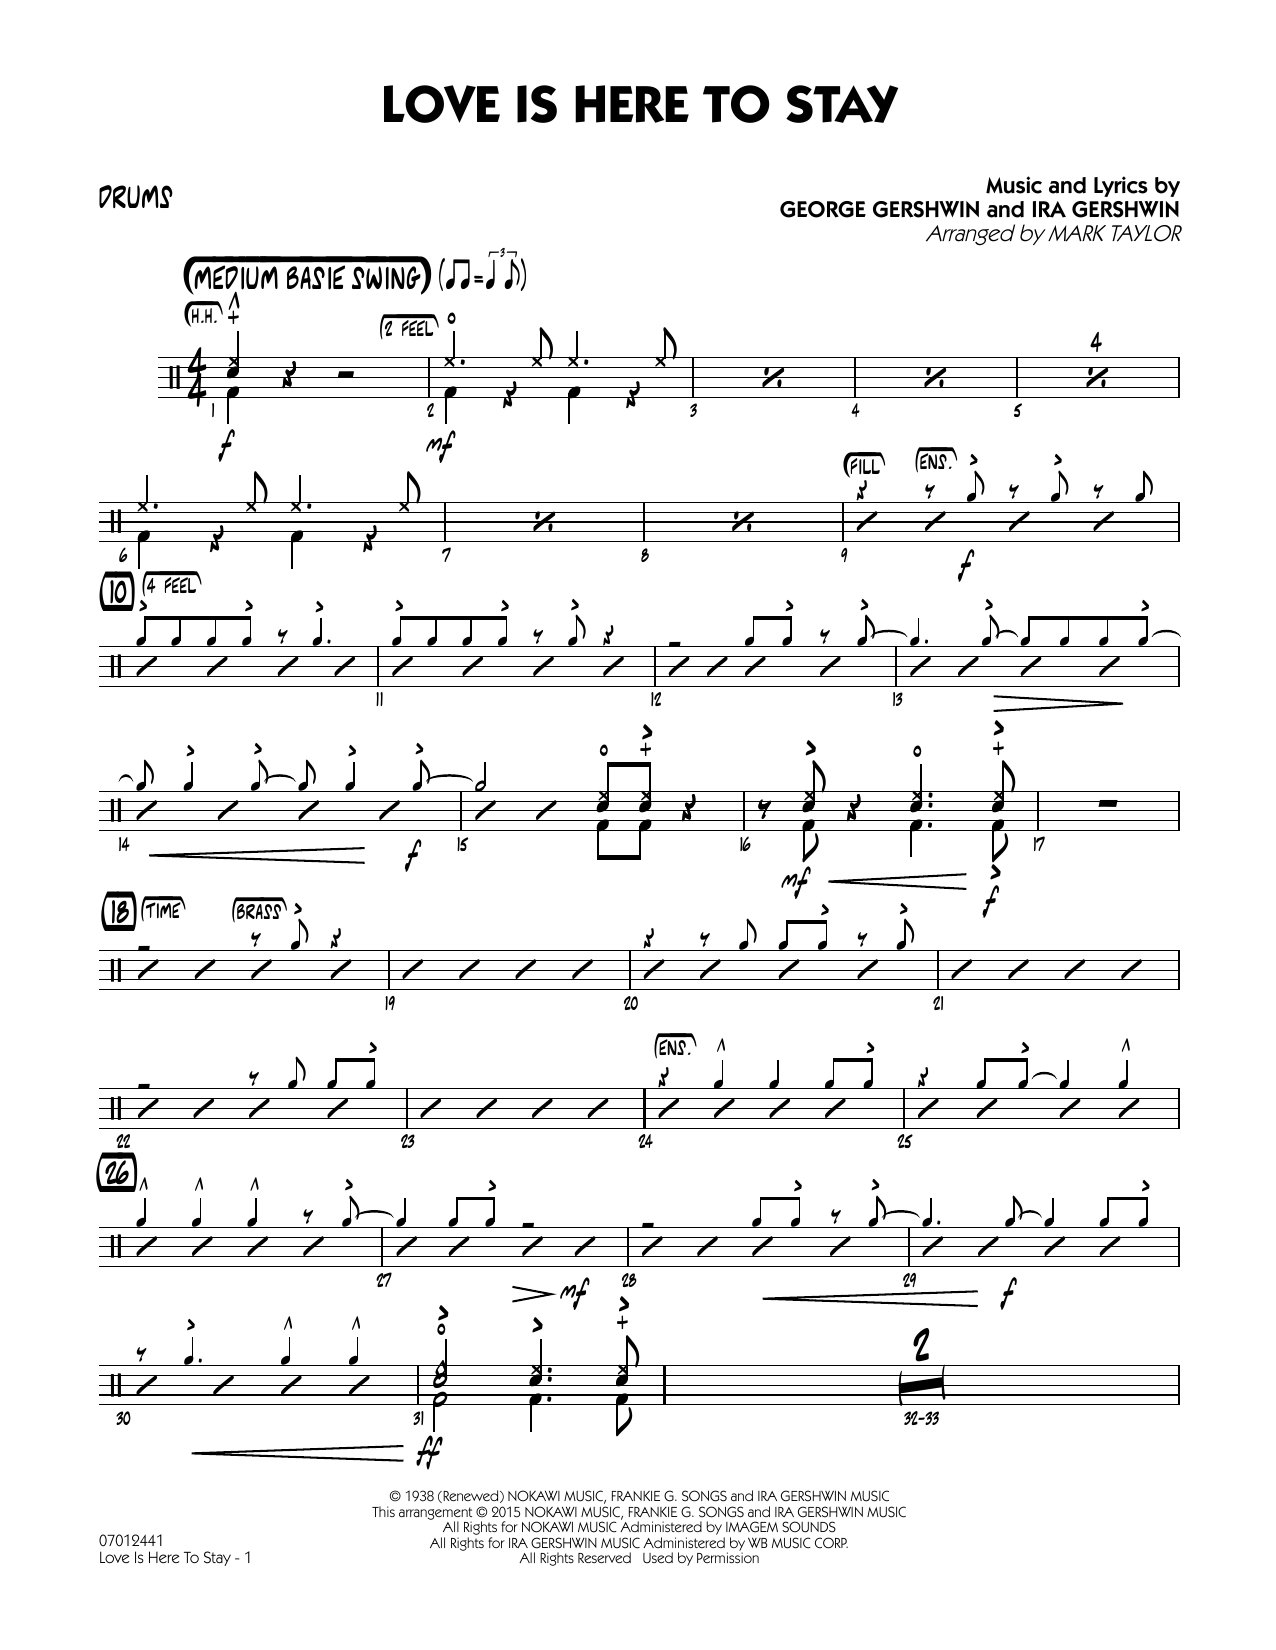 Mark Taylor Love Is Here to Stay - Drums sheet music notes and chords. Download Printable PDF.